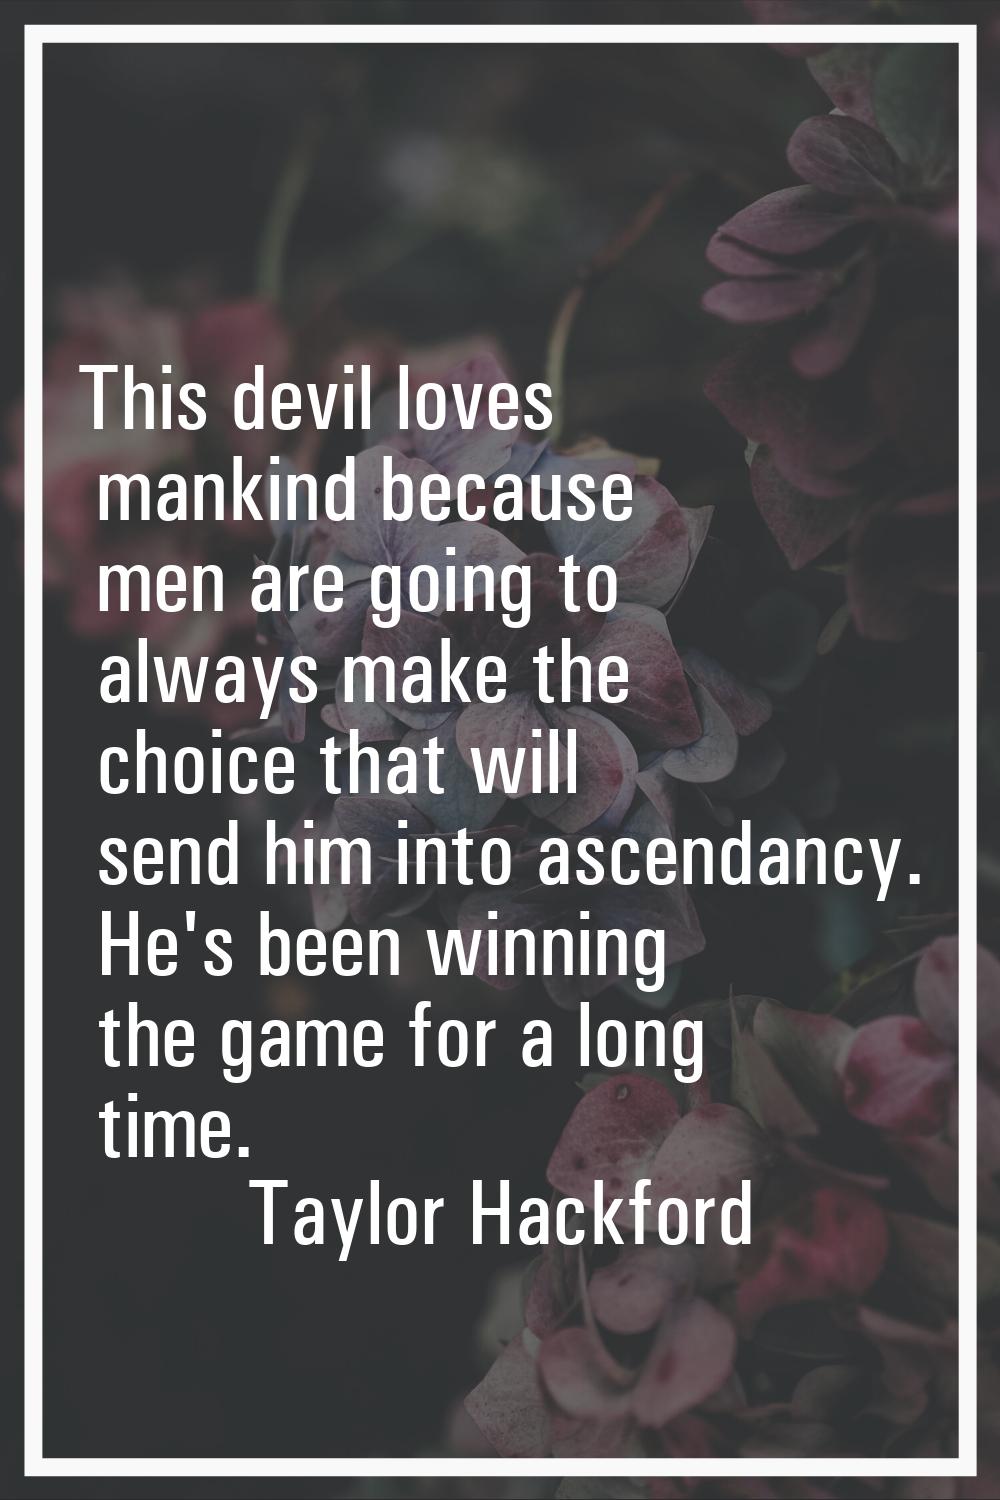 This devil loves mankind because men are going to always make the choice that will send him into as